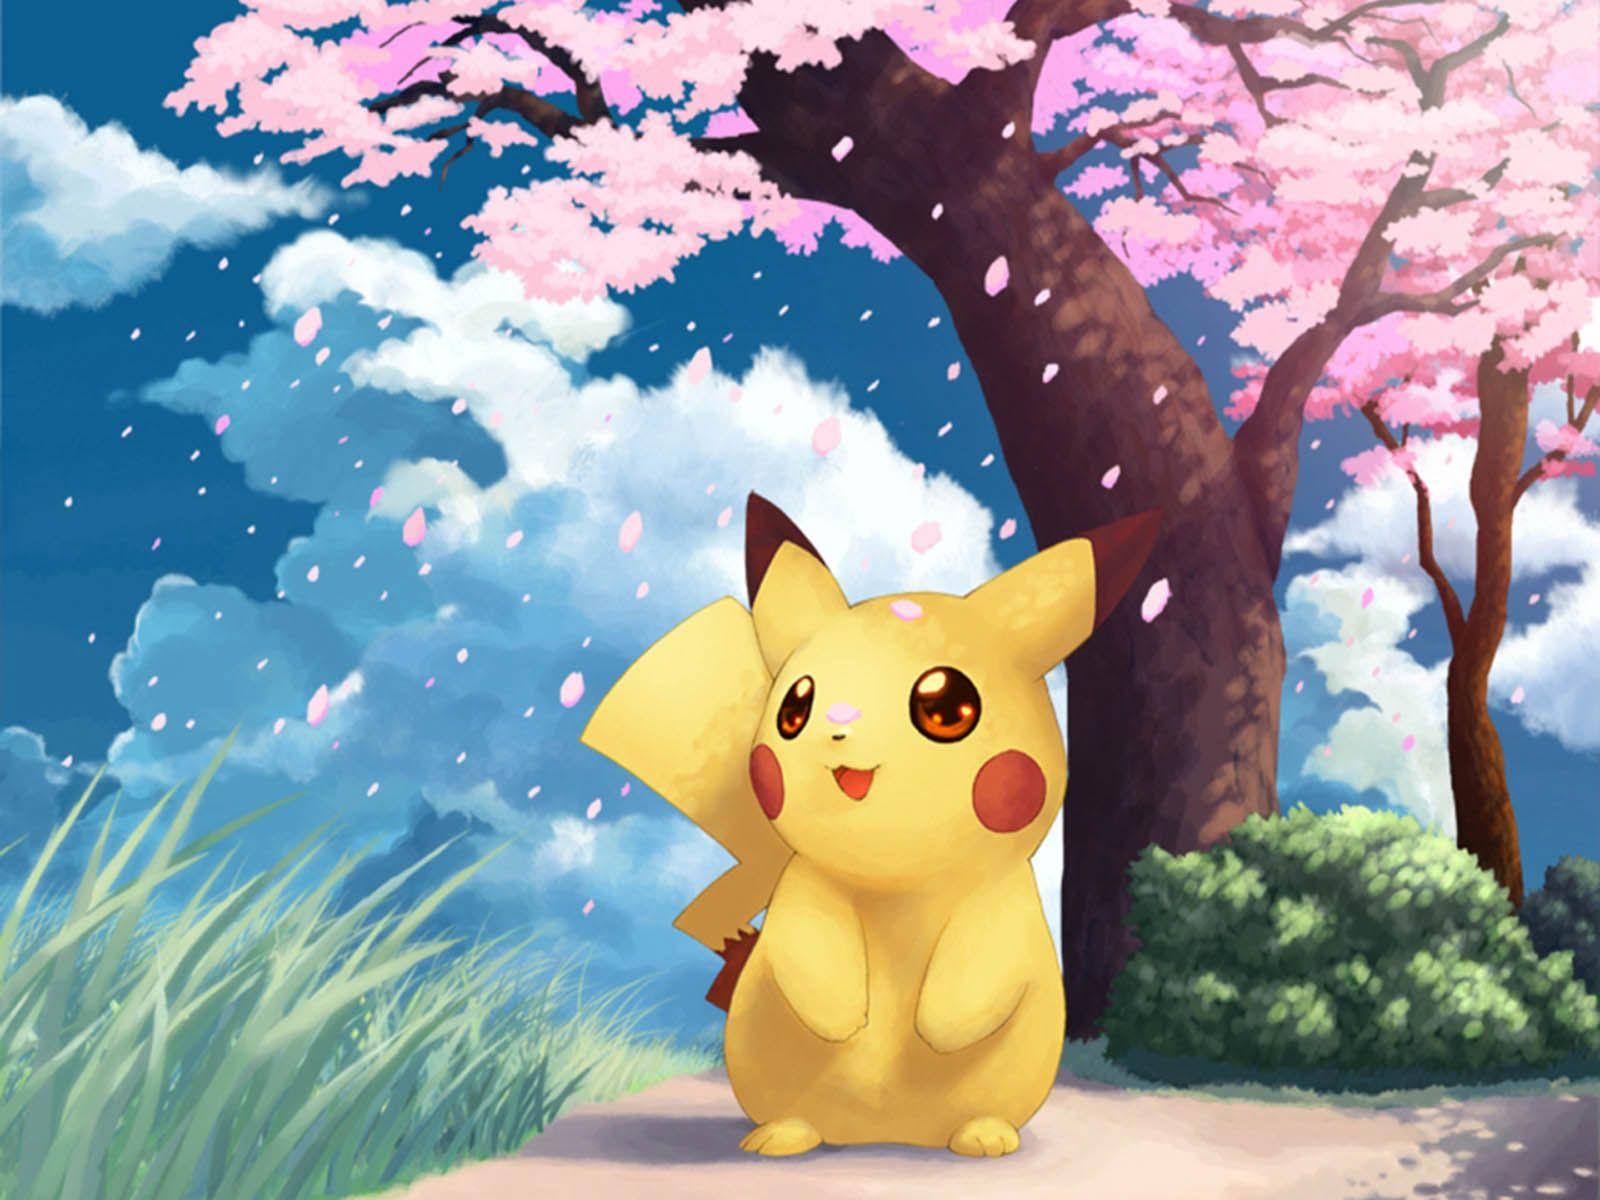 Collection of thousands of Cute Pokemon Wallpaper from all over